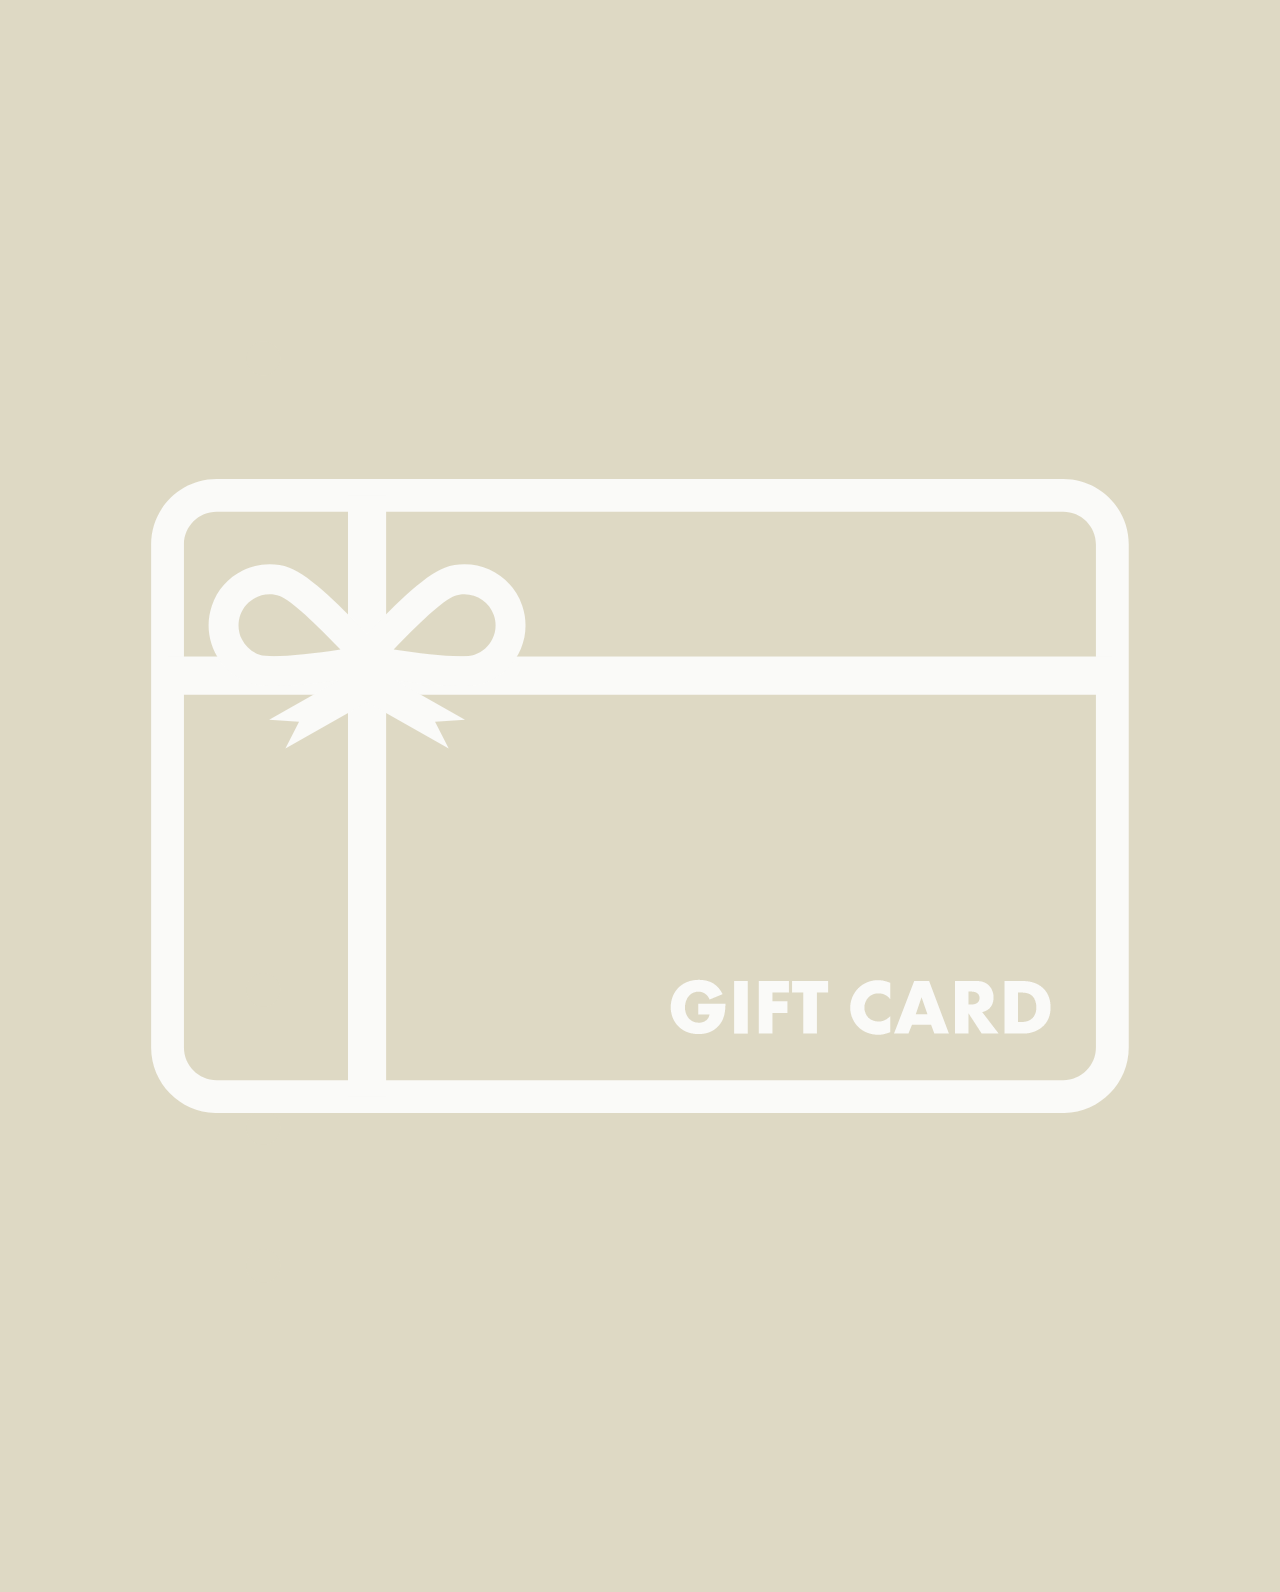 The Line Gift Card